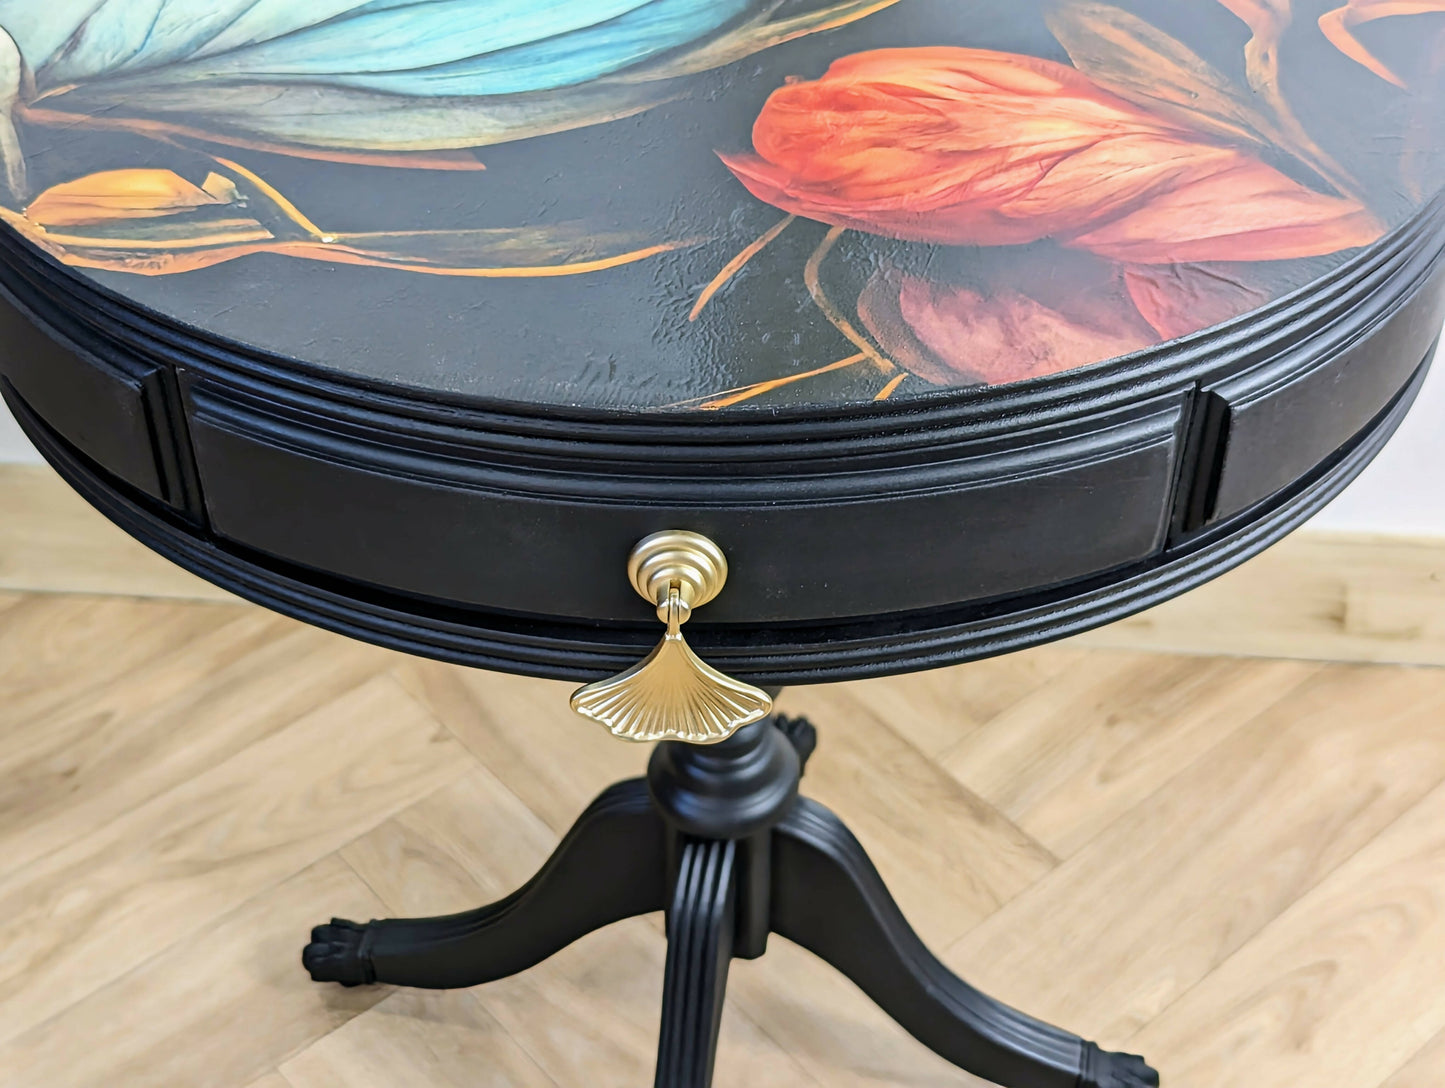 Vintage art deco style drum table with 2 drawers, decoupage side table, black/ gold occasional table, lamp table